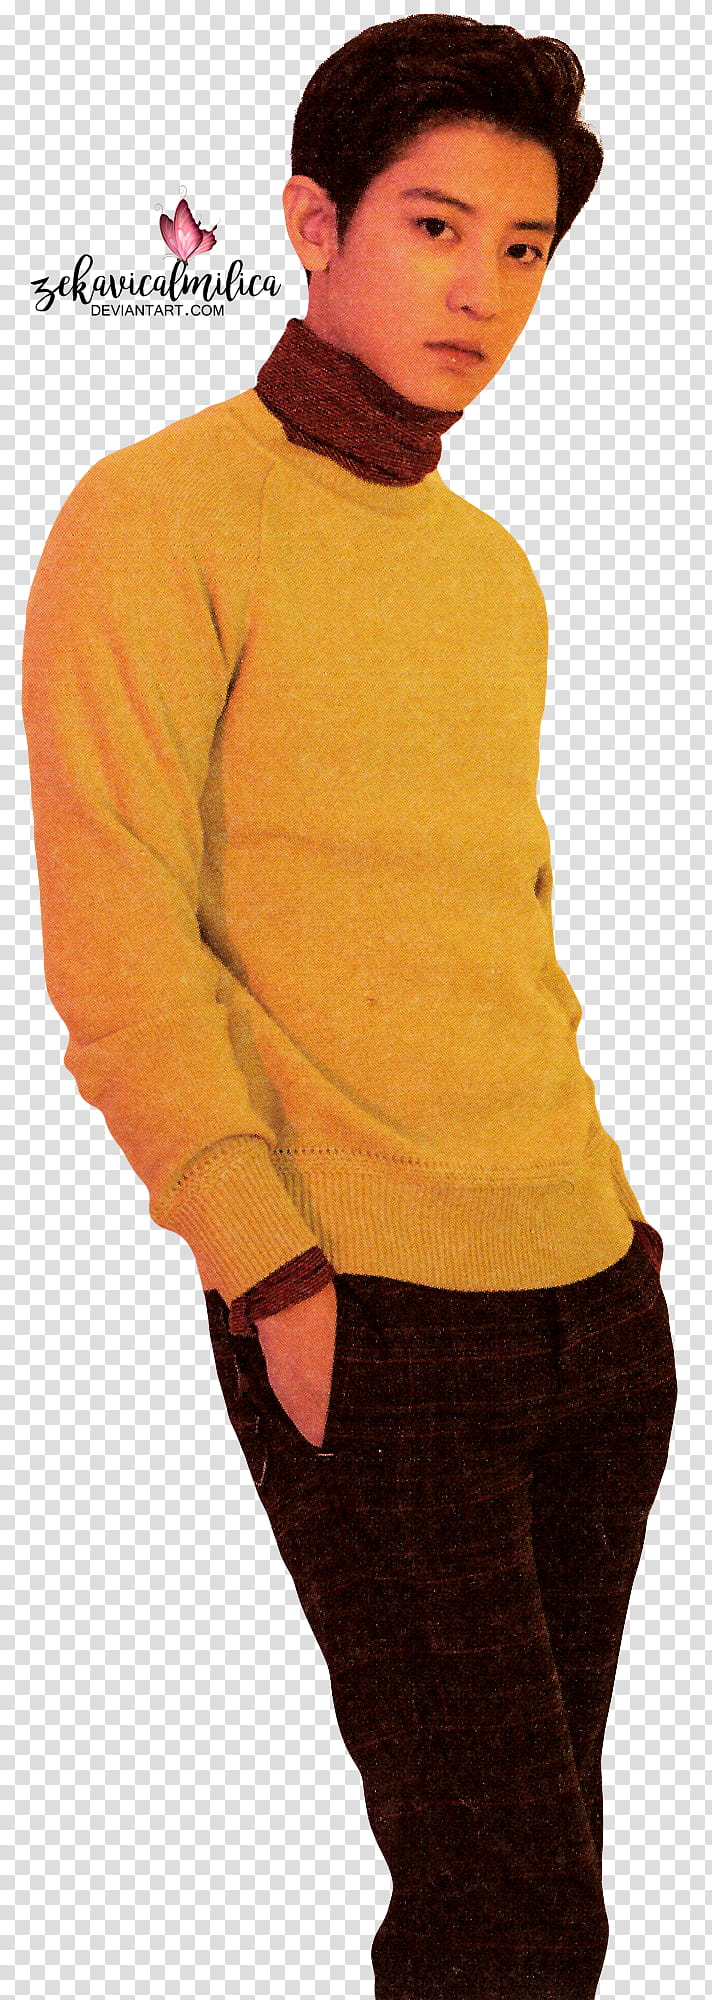 EXO Chanyeol  Season Greetings, man wearing yellow long-sleeved shirt transparent background PNG clipart